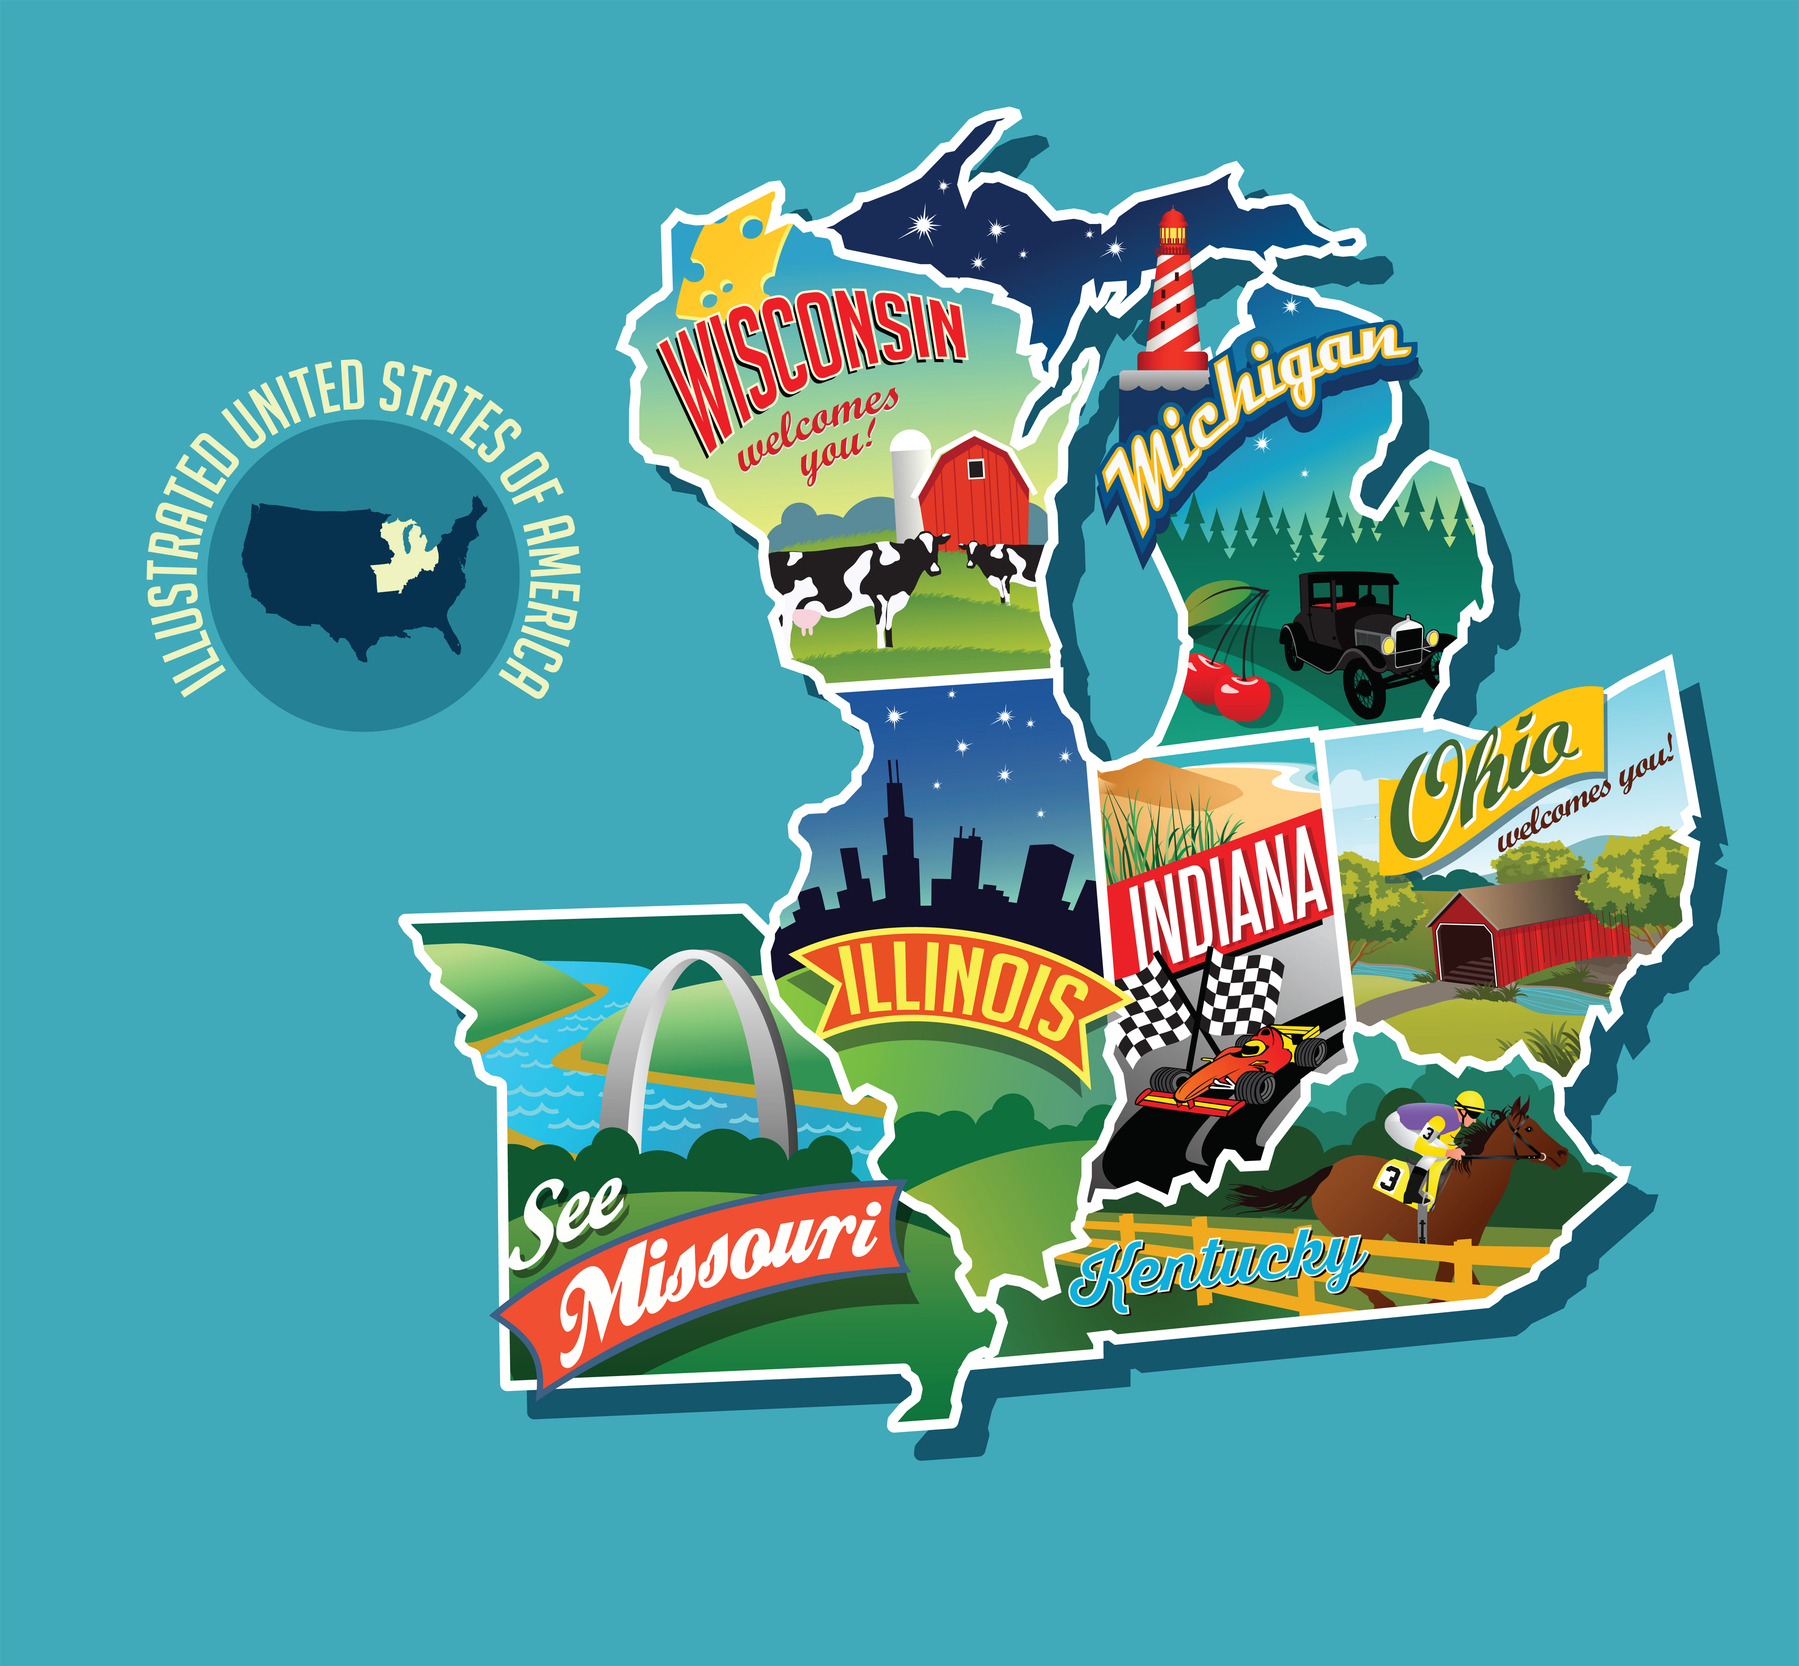 Illustrated map of the United States highlighting Wisconsin, Michigan, Illinois, Indiana, Ohio, Missouri, and Kentucky with state icons